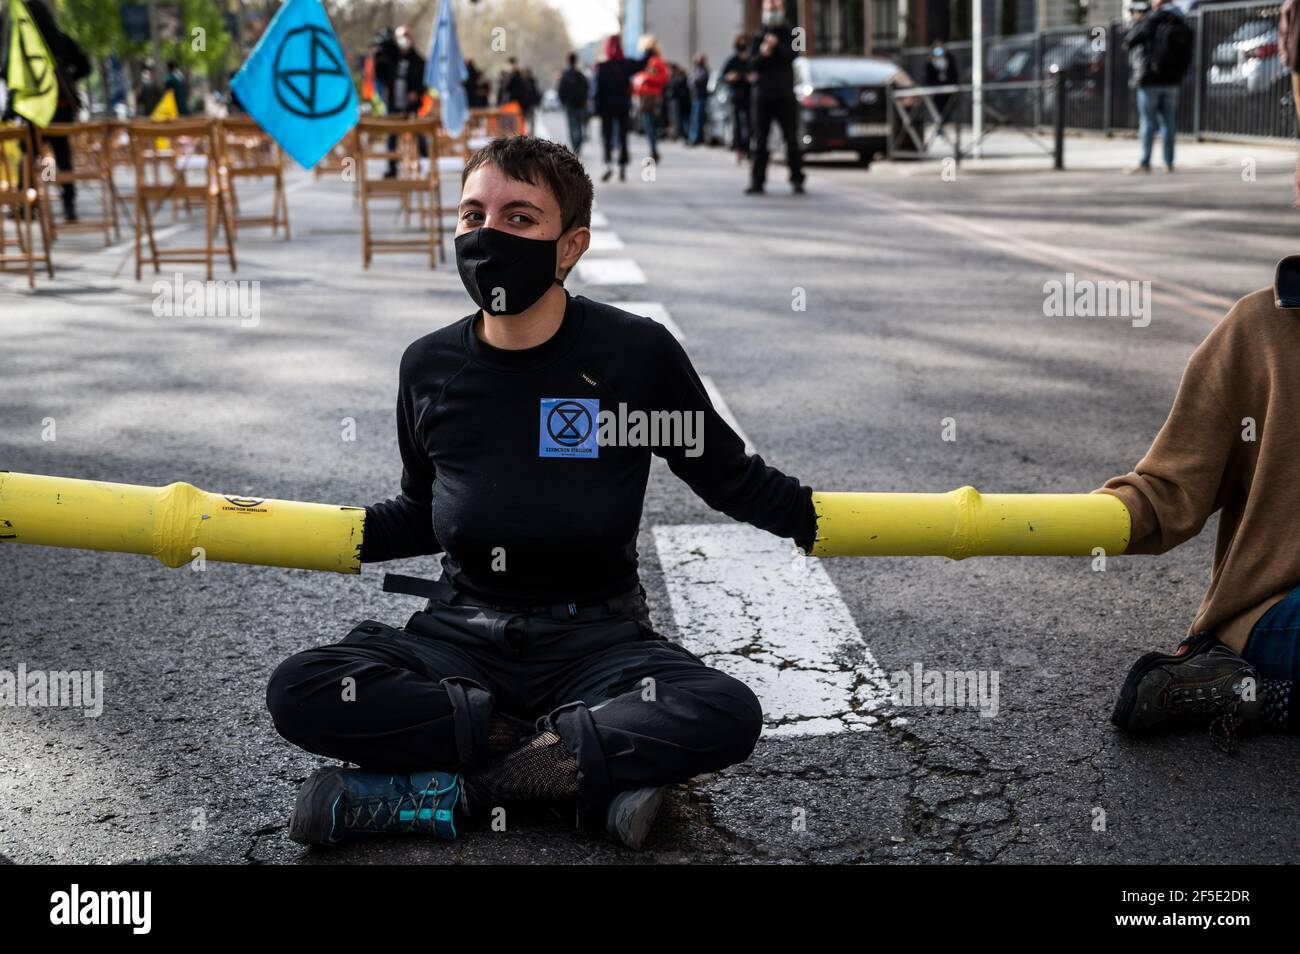 Madrid, Spain. 26th Mar, 2021. Climate change activists of Extinction Rebellion (XR) group chained themselves blocking the street in front of the Health Ministry, during a protest demanding actions against climate change. Credit: Marcos del Mazo/Alamy Live News Stock Photo